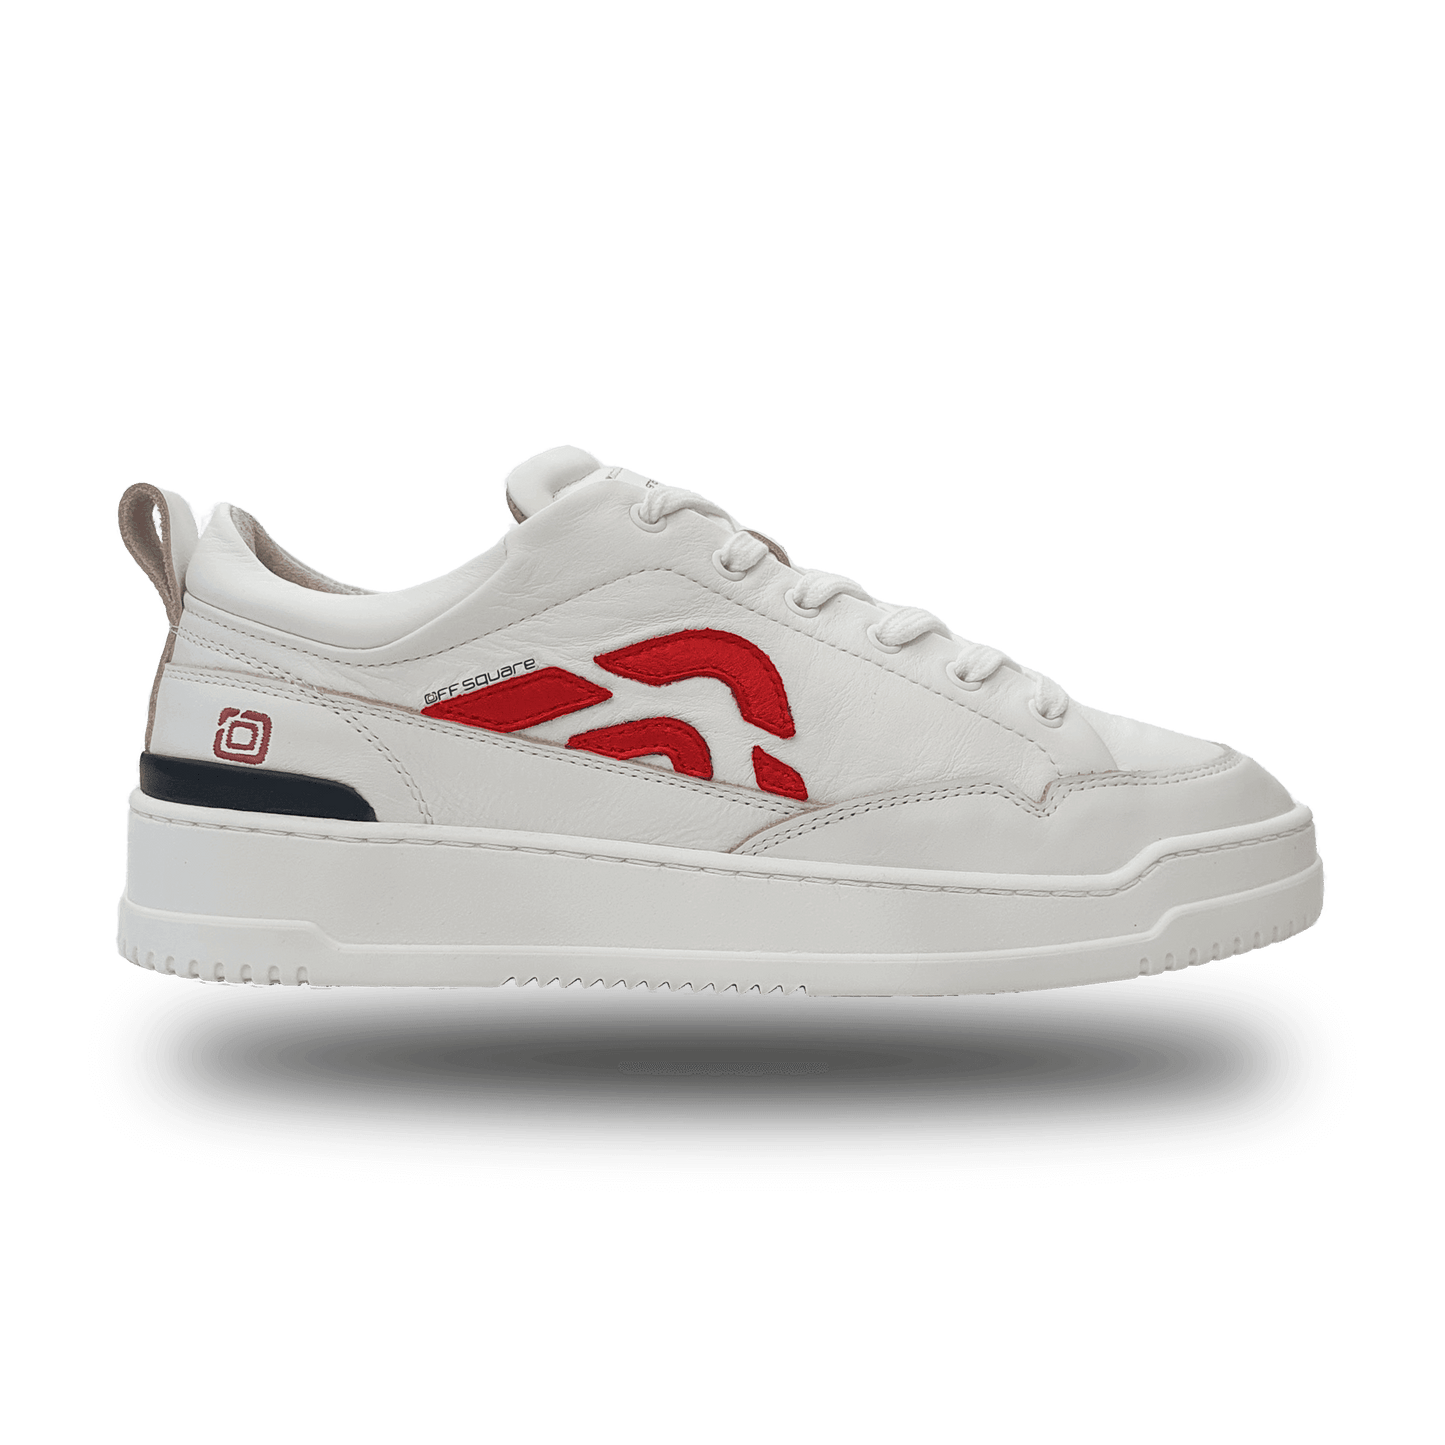 Off-Square duurzame witte unisex sneaker met rood logo